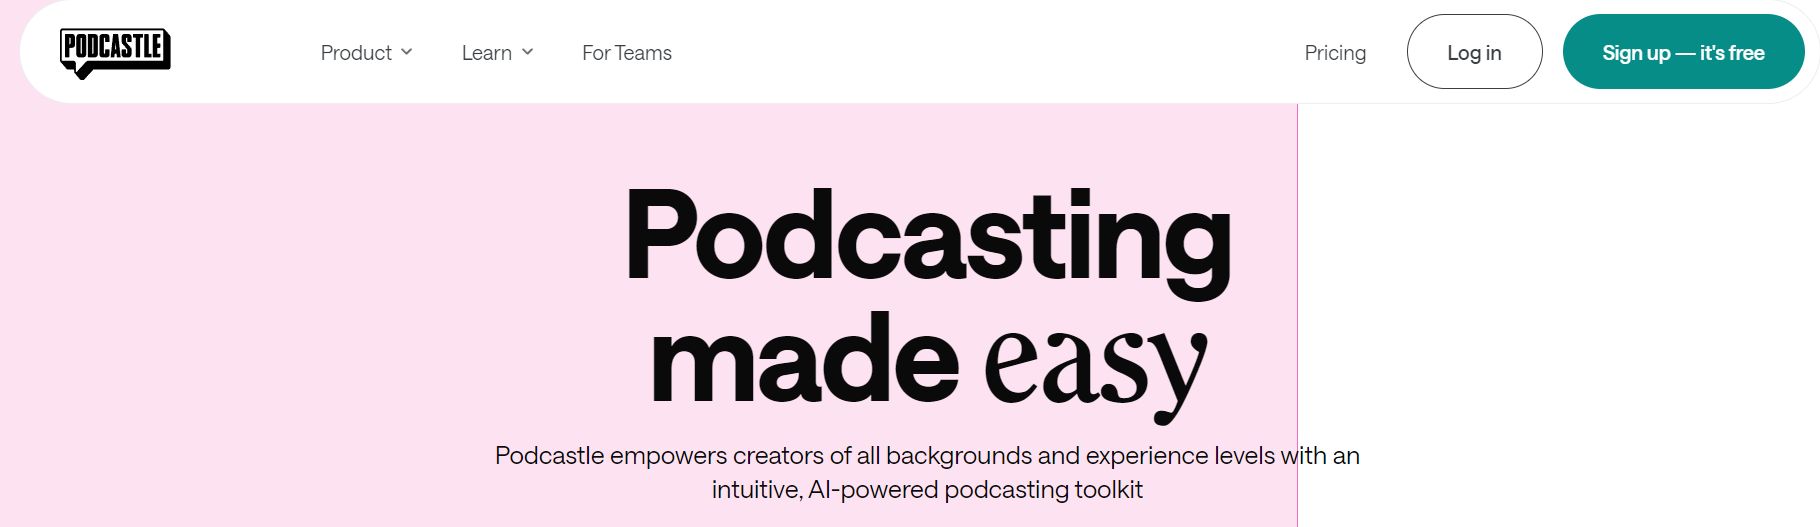 Podcastle podcast editing software homepage